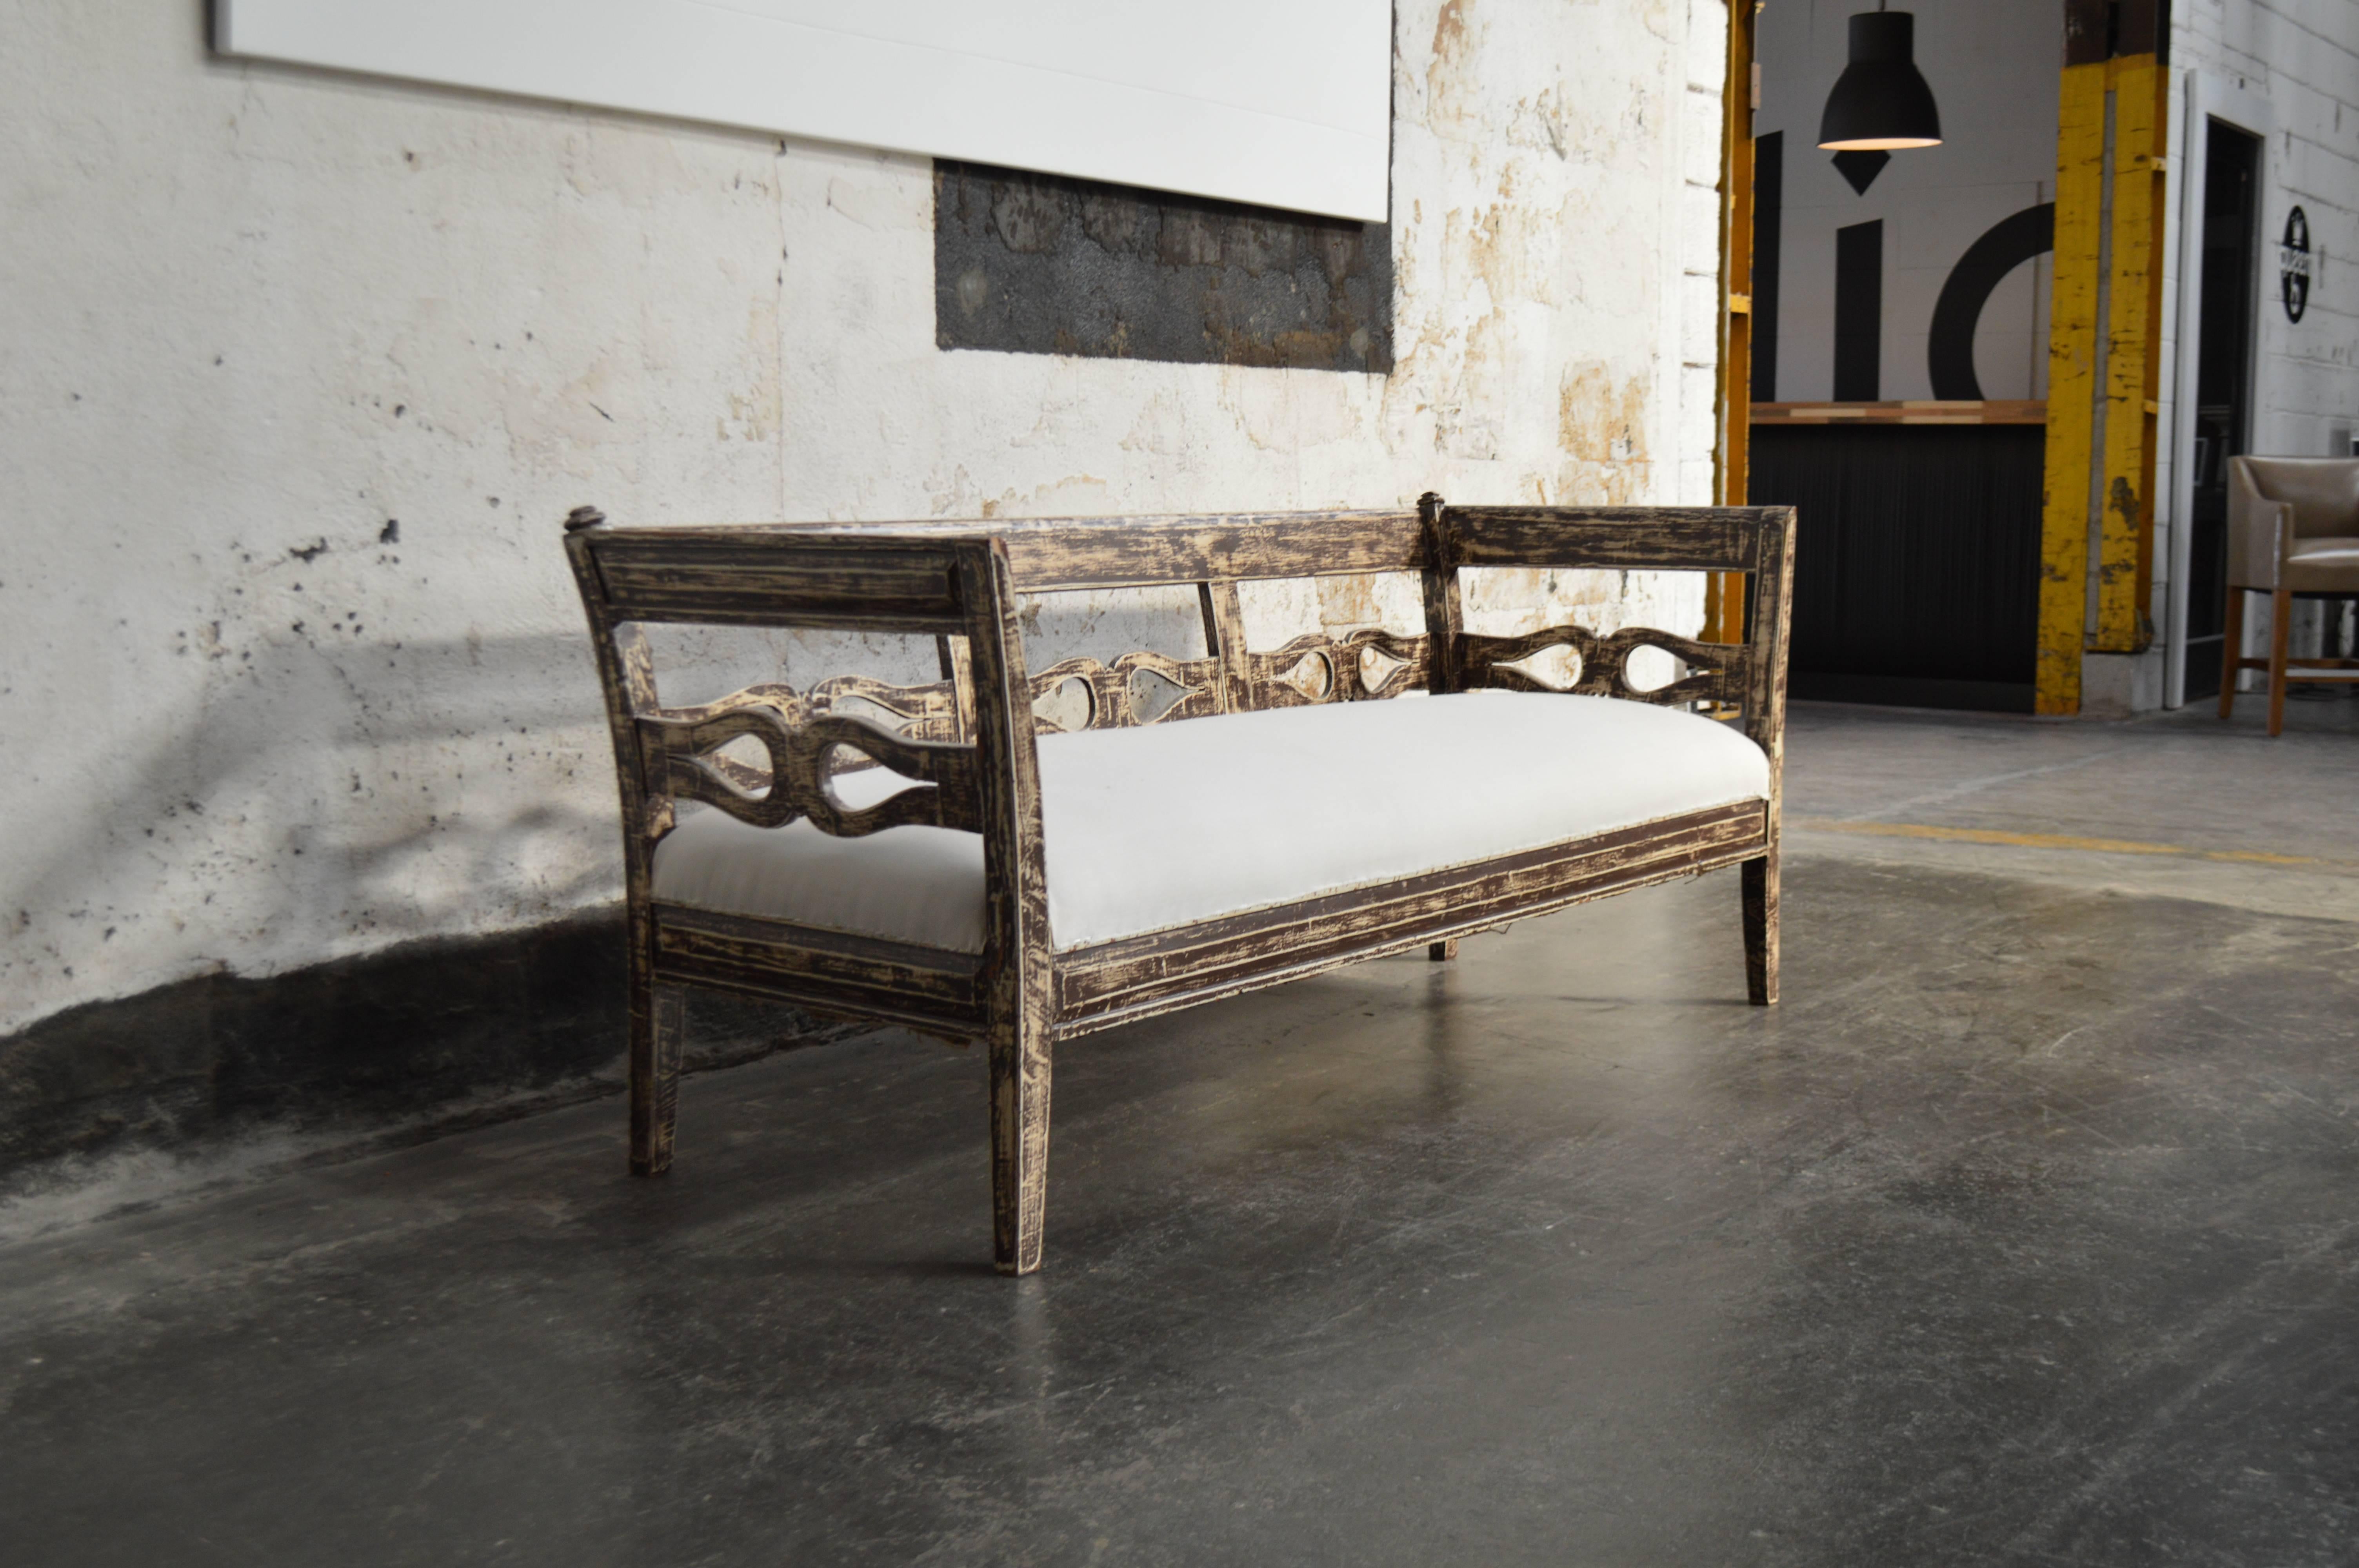 Restored Swedish Country settee, sofa or bench in the Gustavian Style. Probably late 19th century, but possibly earlier. 

 The top layer of brown paint has been partially distressed to reveal the original white paint color. All wood has been